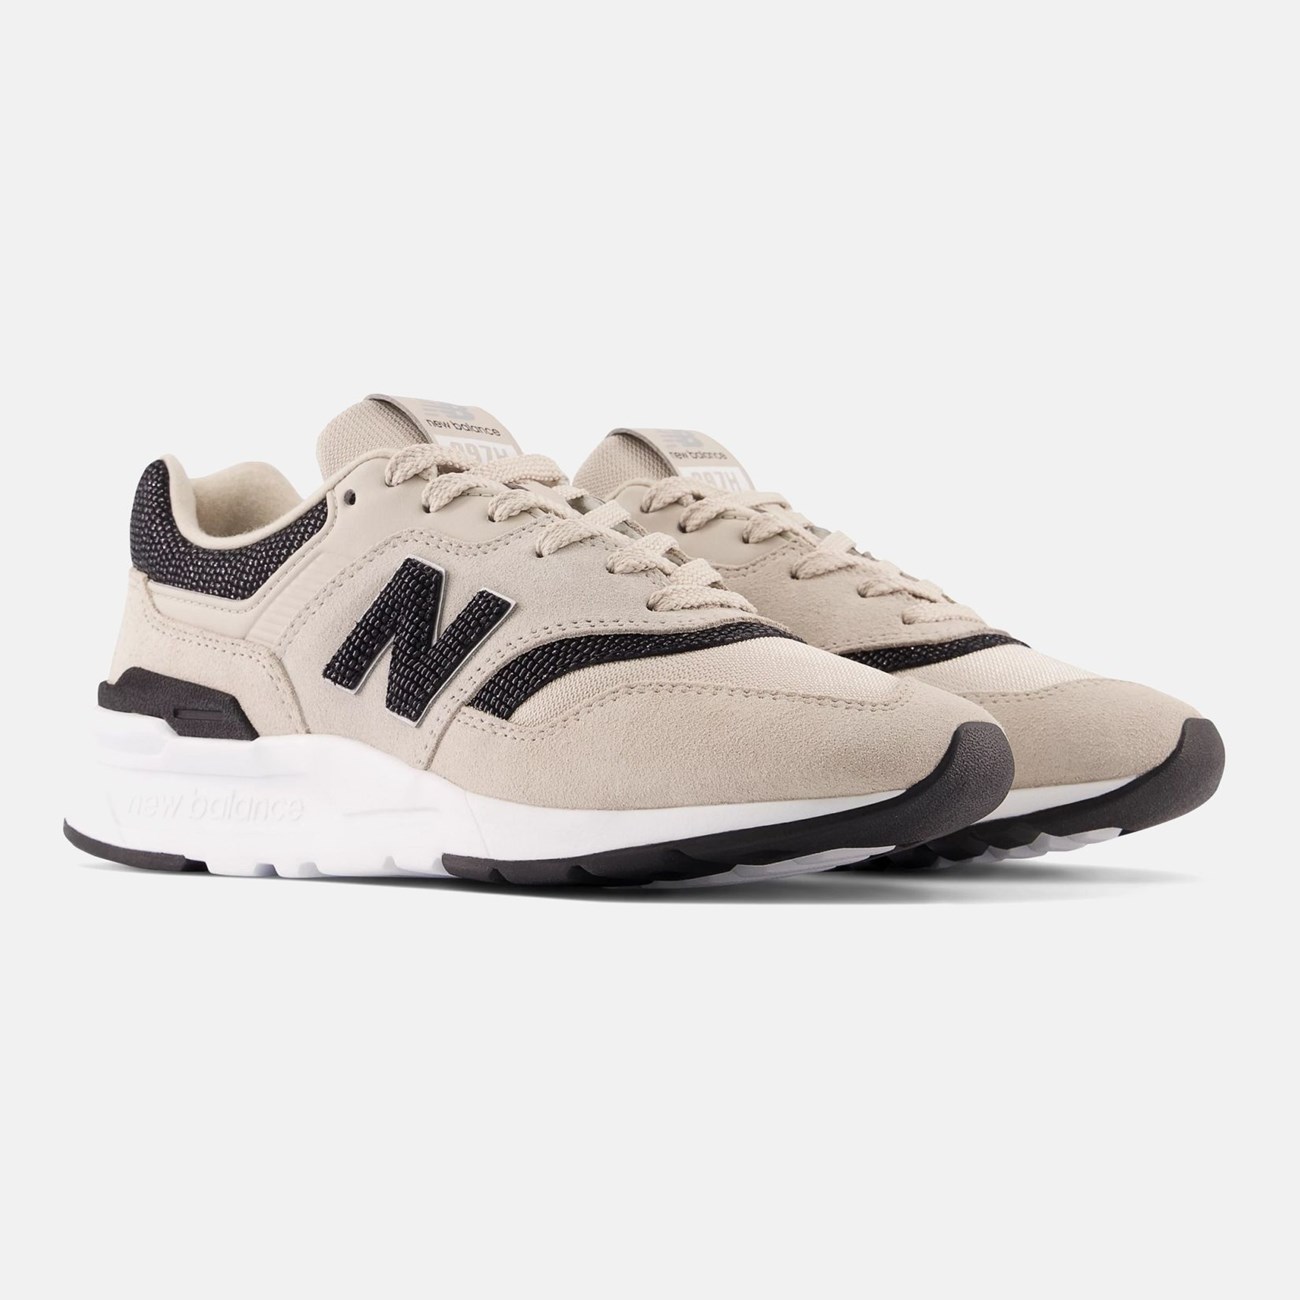 NEW BALANCE Γυναικεία Sneakers 997H CW997-HDT - The Athlete's Foot